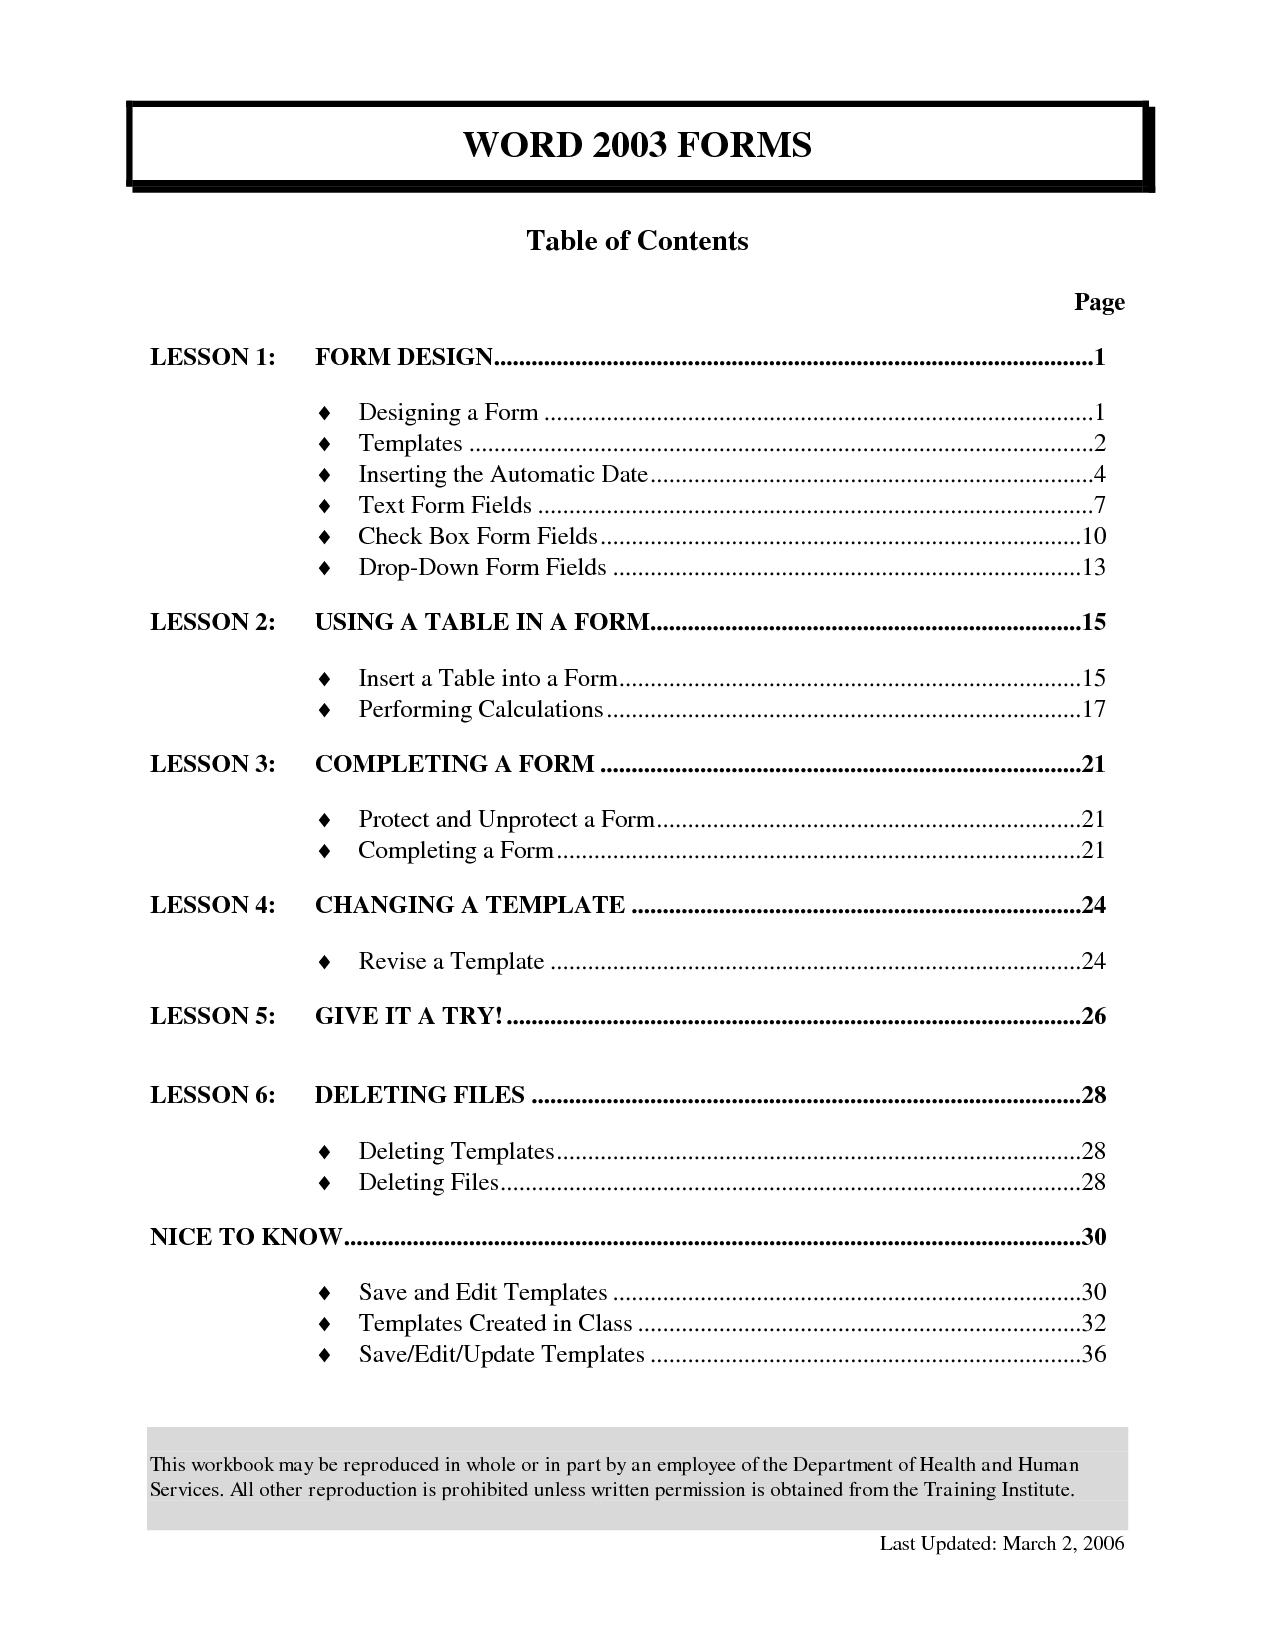 002 Table Of Contents Template Word Fln8s207 Ulyssesroom